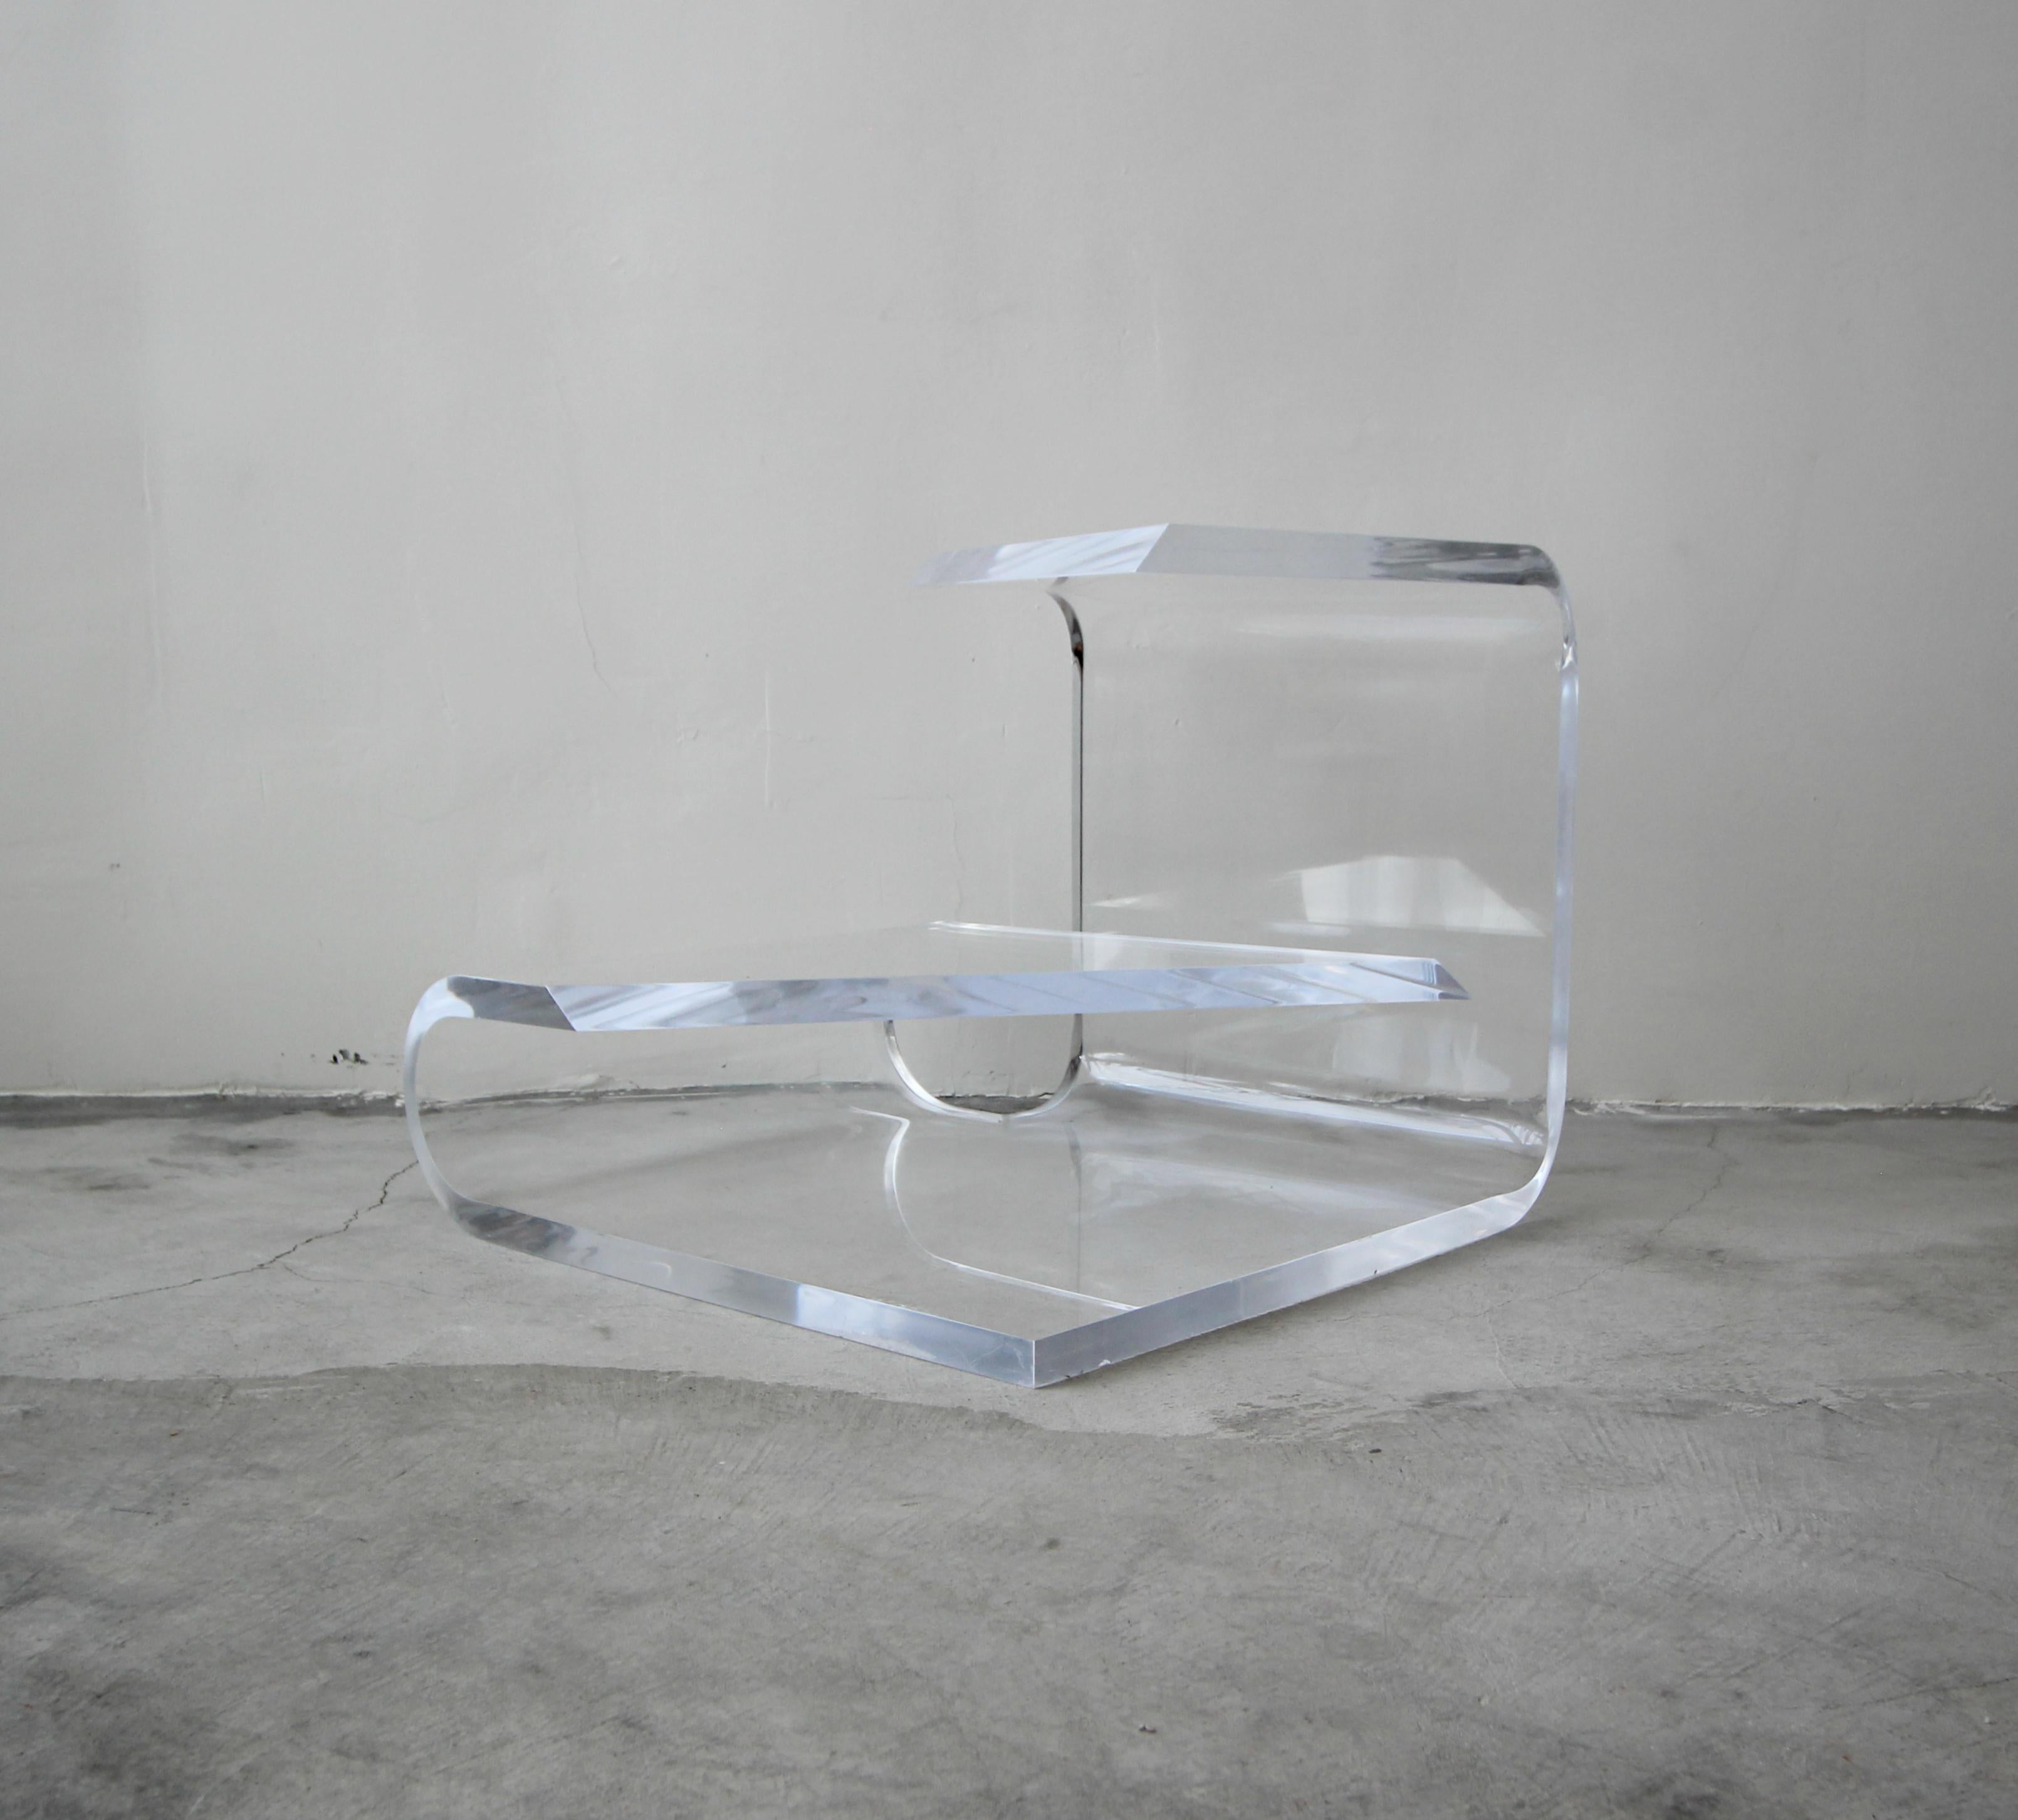 A stunning example of vintage Lucite. This two-tier 1